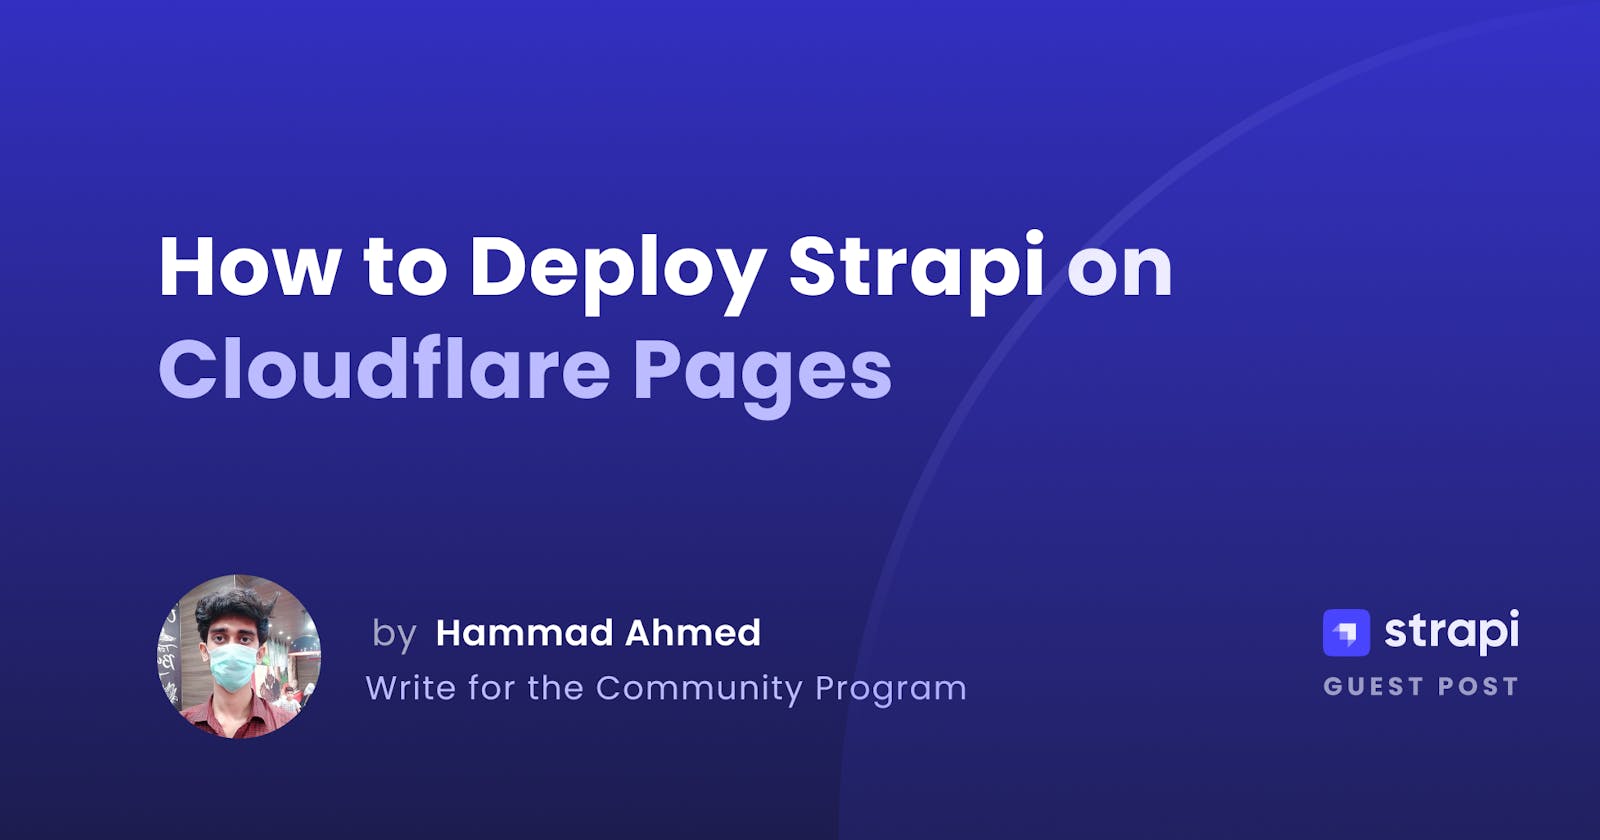 How to Deploy Strapi on Cloudflare Pages